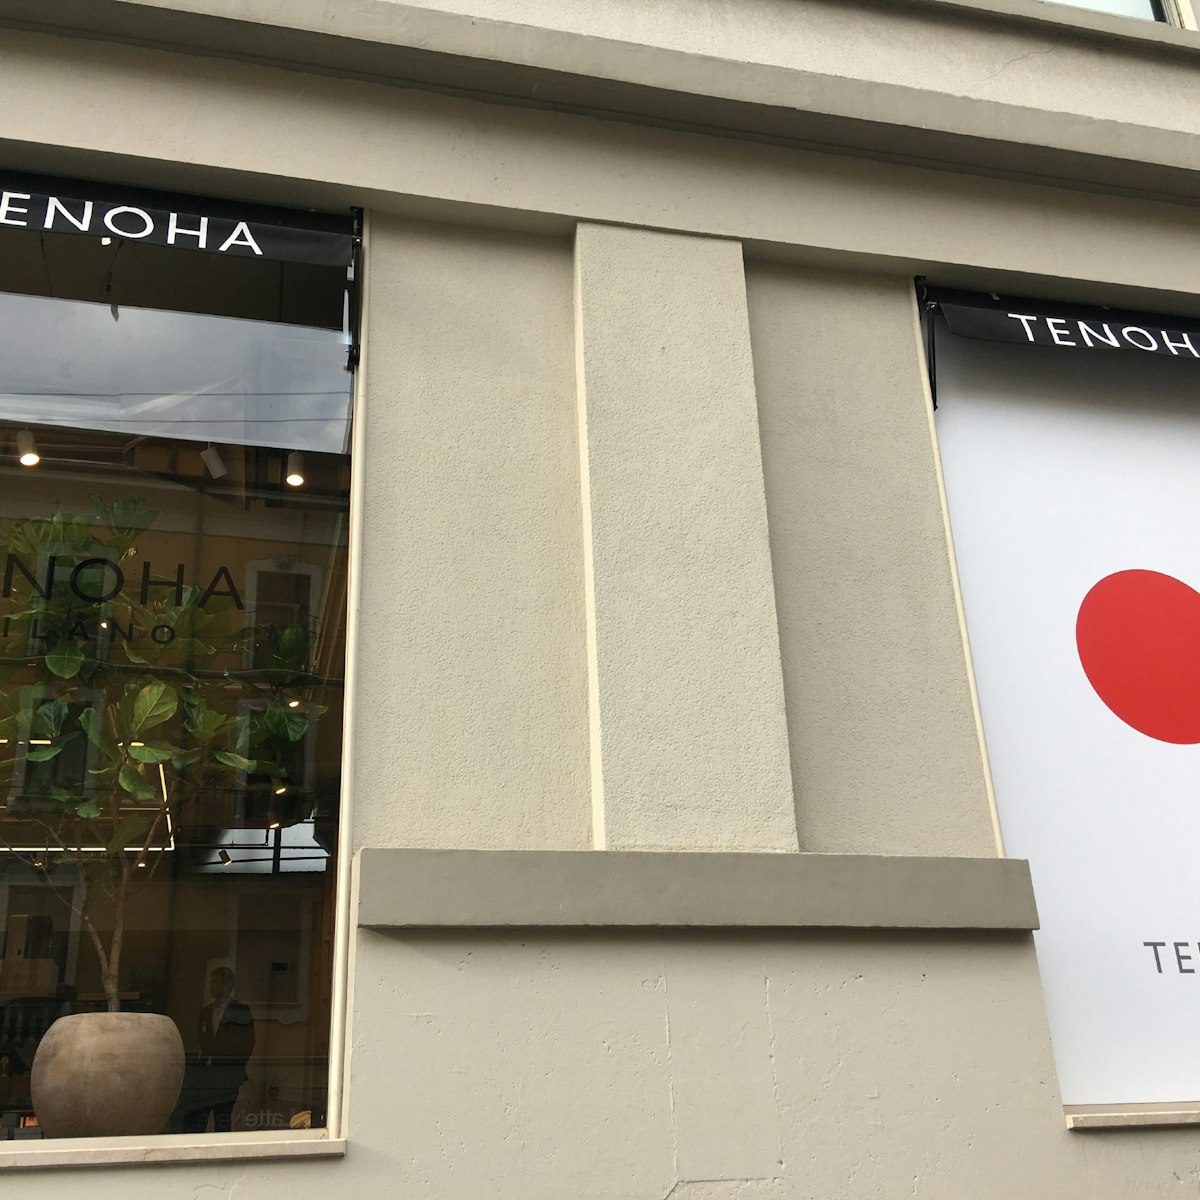 Exterior of the Tenoha concept space